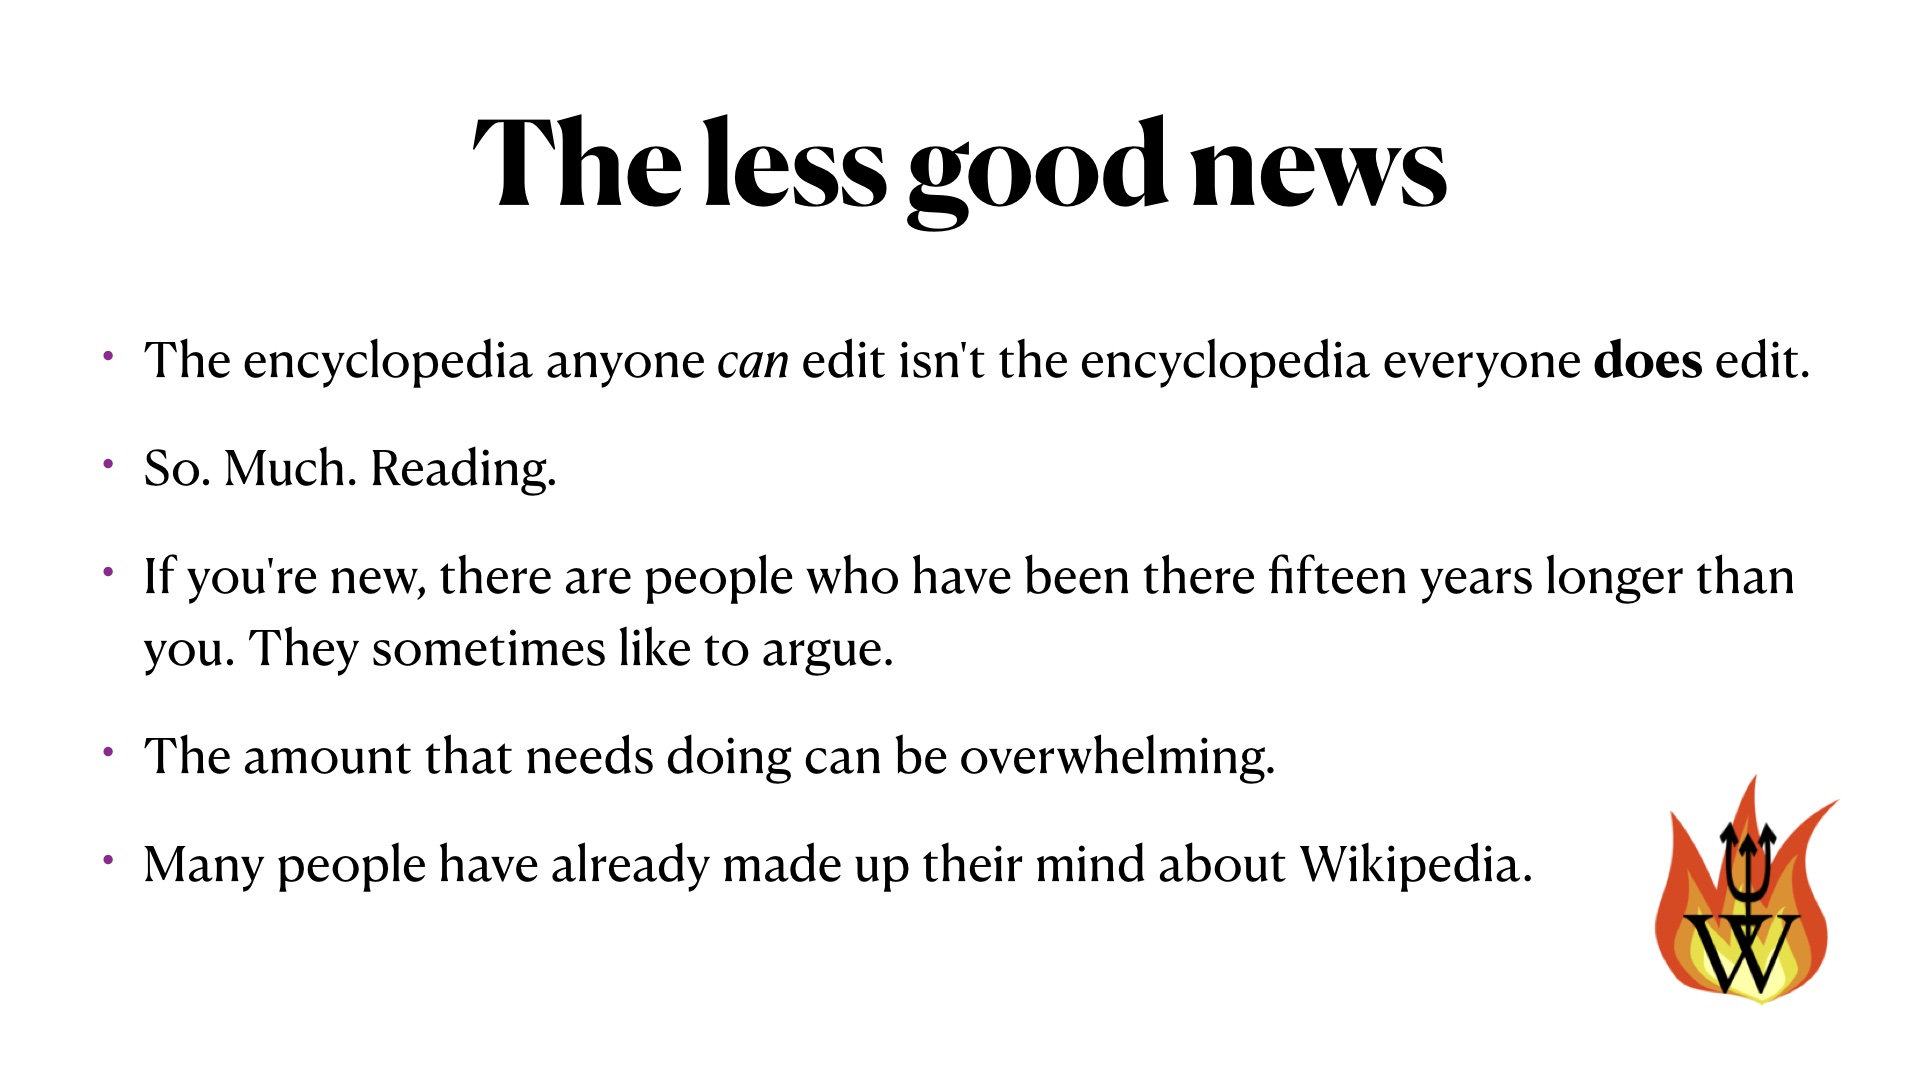 The less good news: The encyclopedia anyone can edit isn't the encyclopedia everyone does edit.
So. Much. Reading.
If you're new, there are people who have been there fifteen years longer than you. They sometimes like to argue.
The amount that needs doing can be overwhelming.
Many people have already made up their mind about Wikipedia.